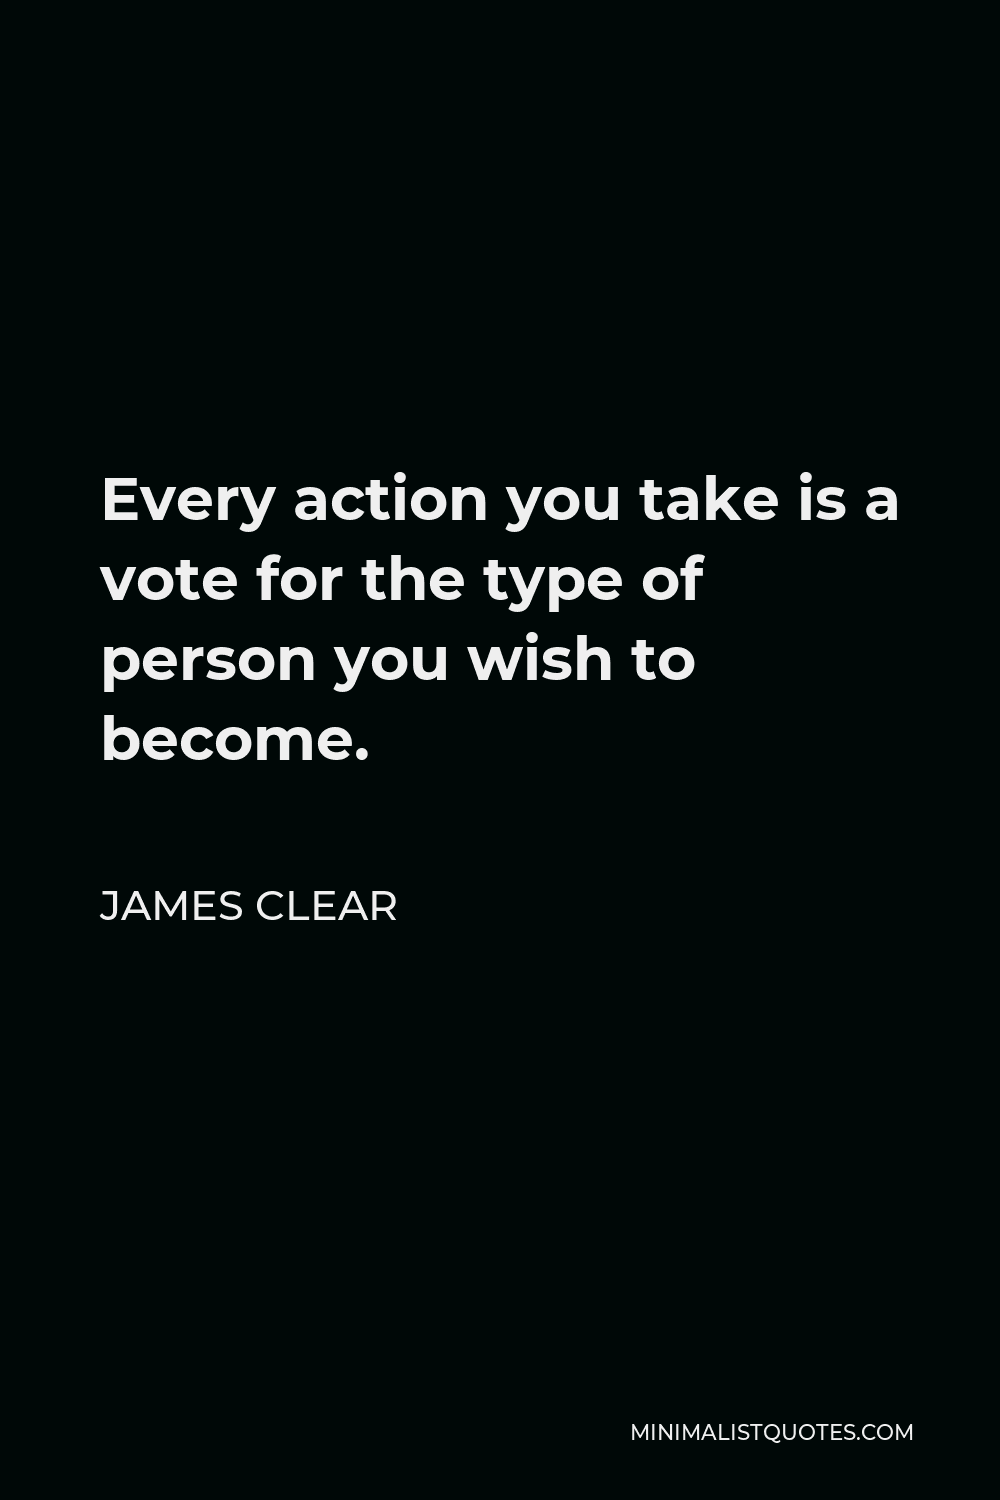 James Clear Quote - Every action you take is a vote for the type of person you wish to become.